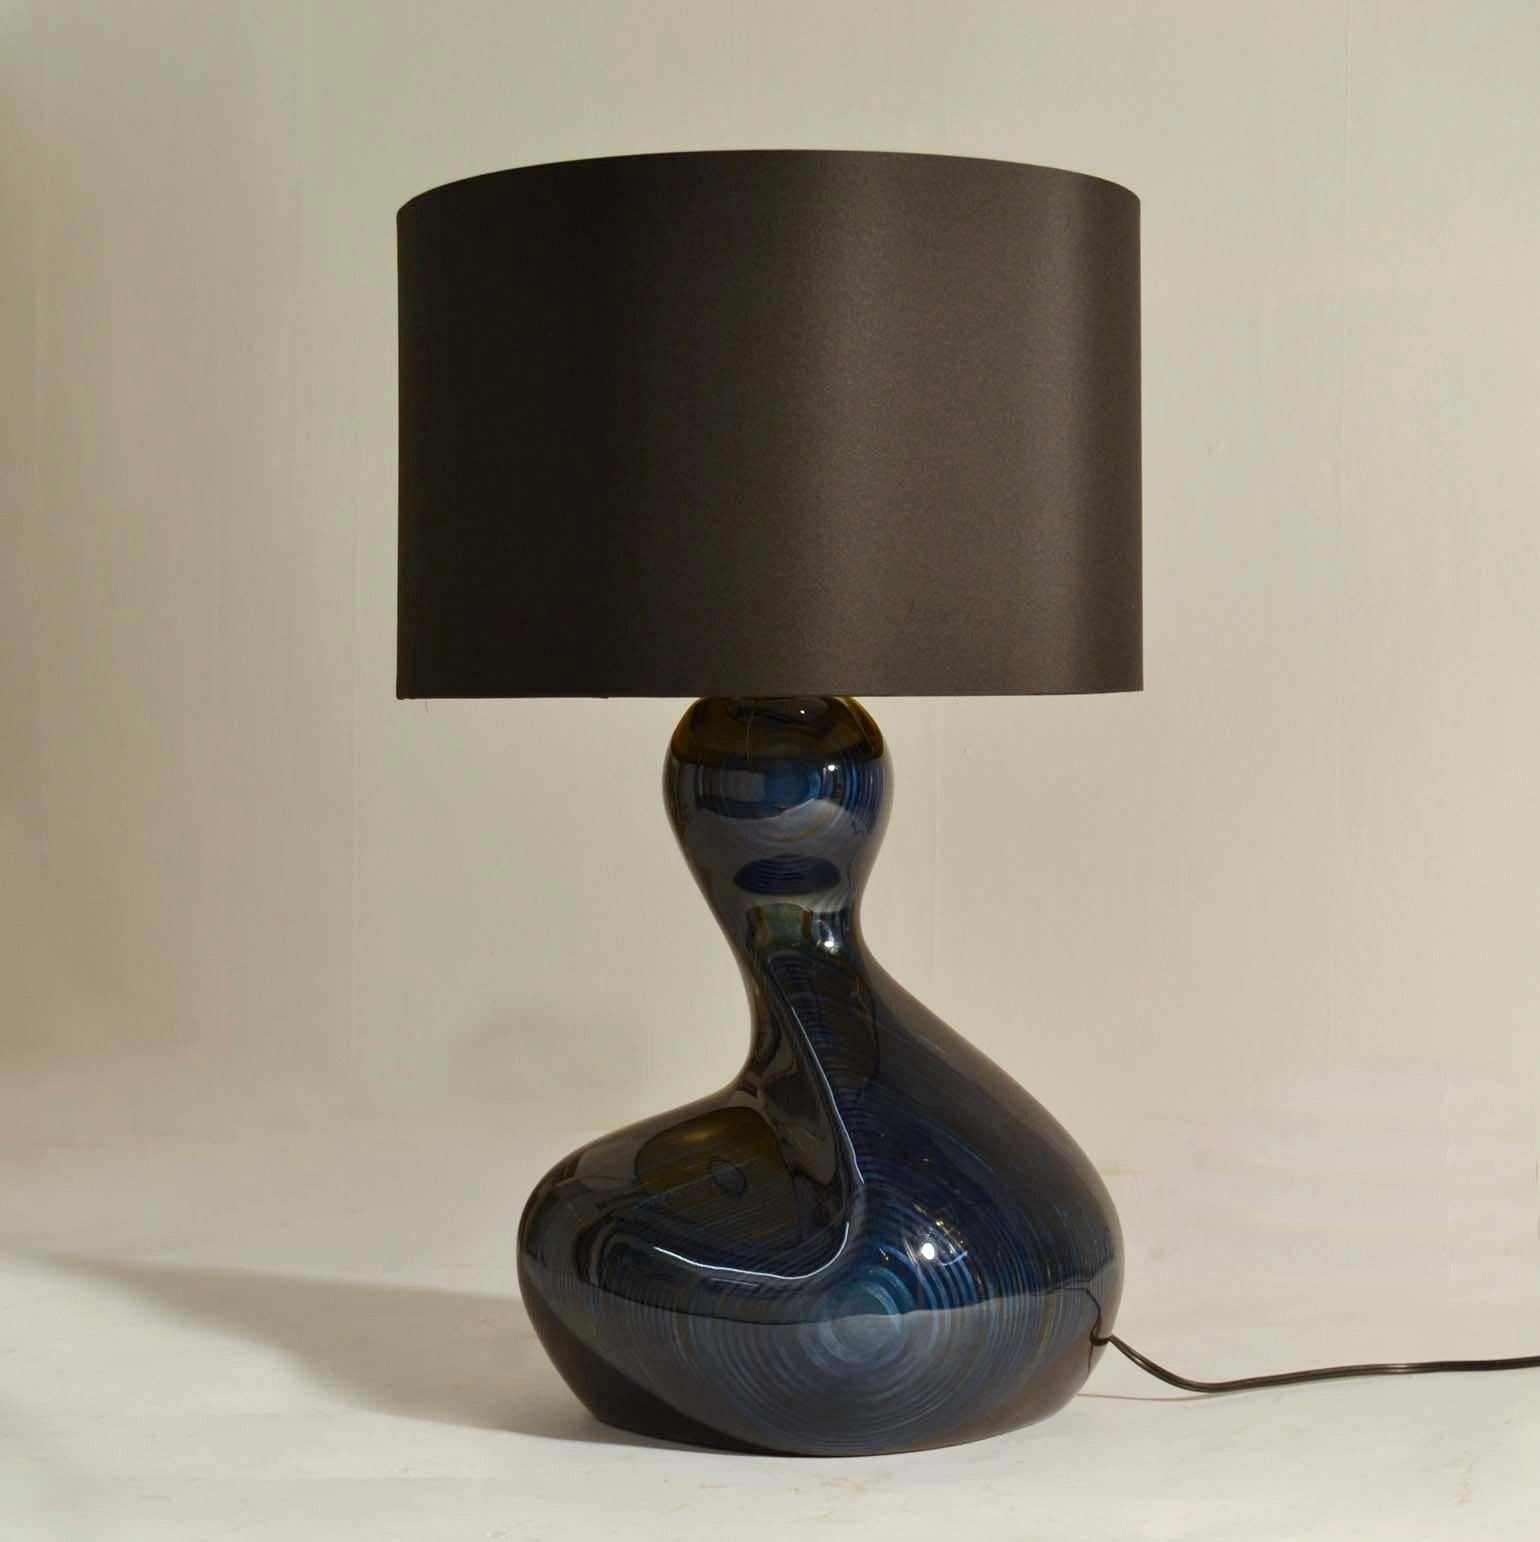 Free form sculptural table lamp in deep blue wood with black shade by Chris Wallis 2000, no 26 of a limited edition. The base is sculpted out of a solid plywood stained and lacquered which reveals the layers in an organic way like yearrings of a